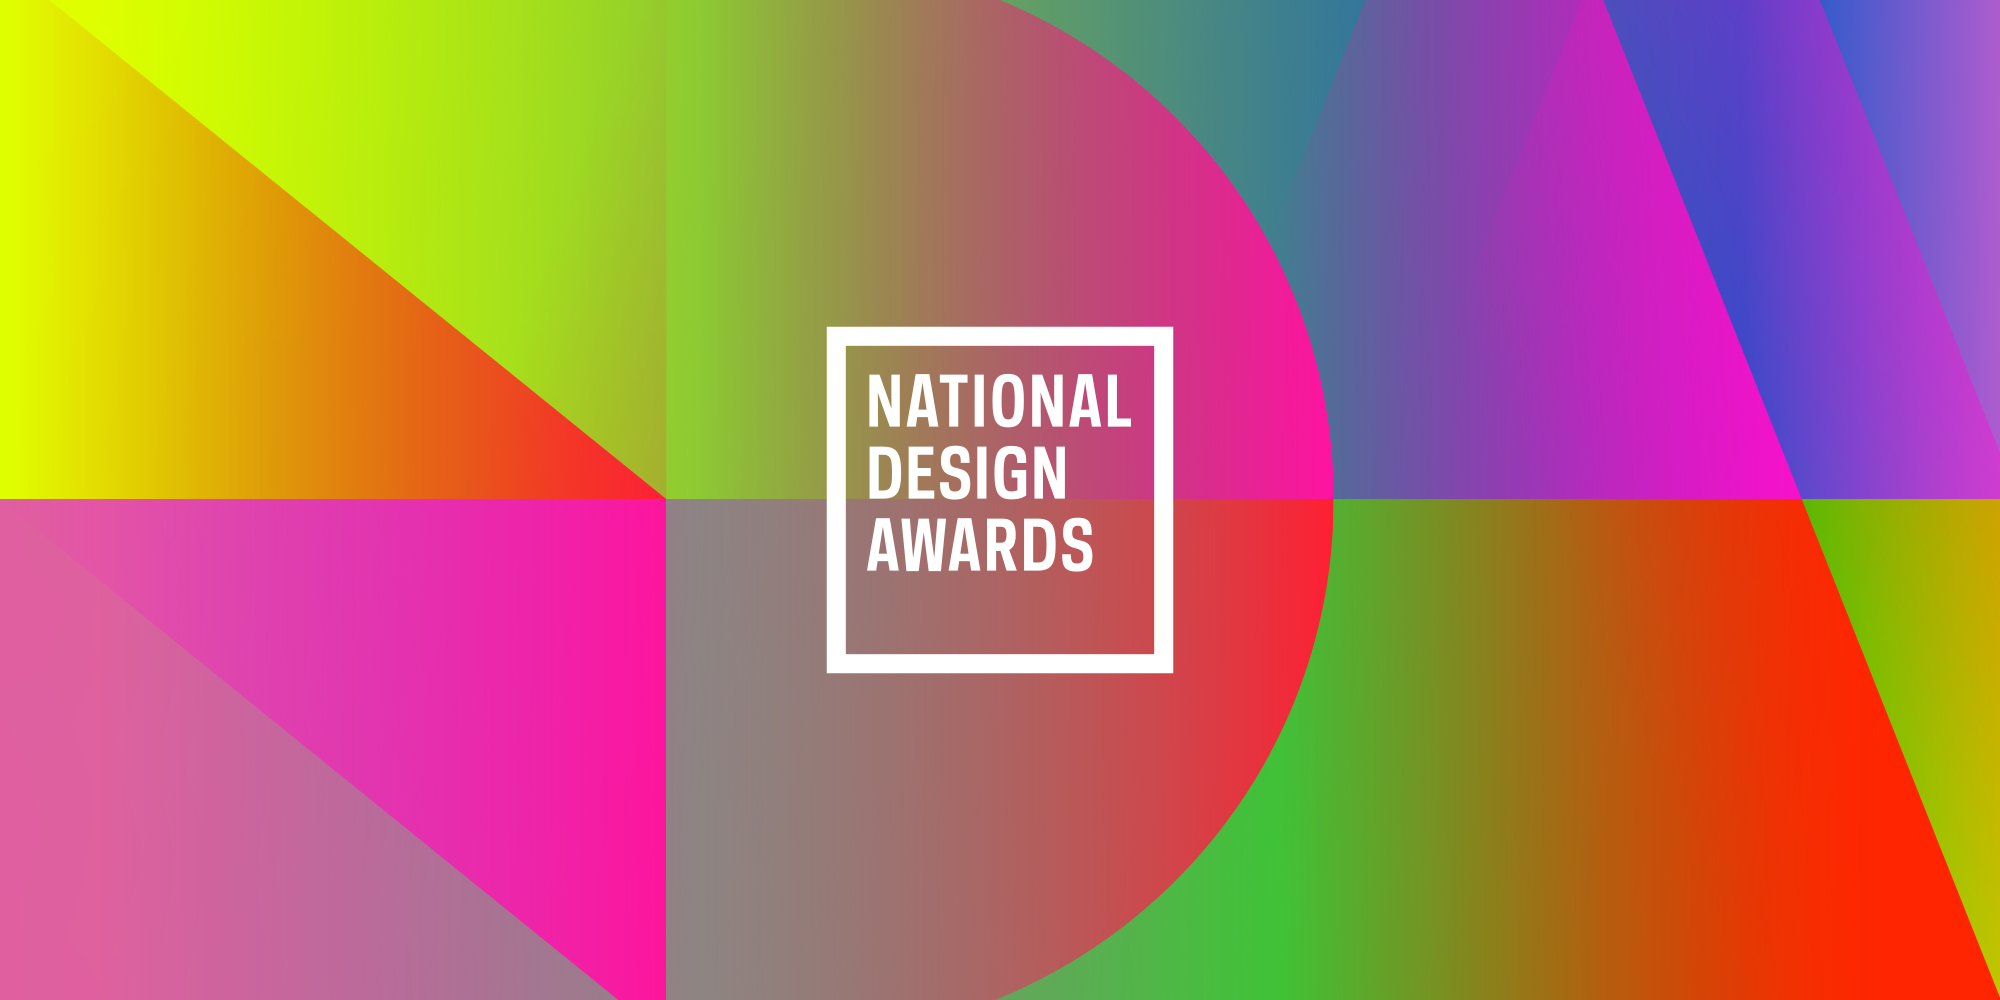 Bright, prismatic graphic pattern with a center logo in white type reading "NATIONAL DESIGN AWARDS"